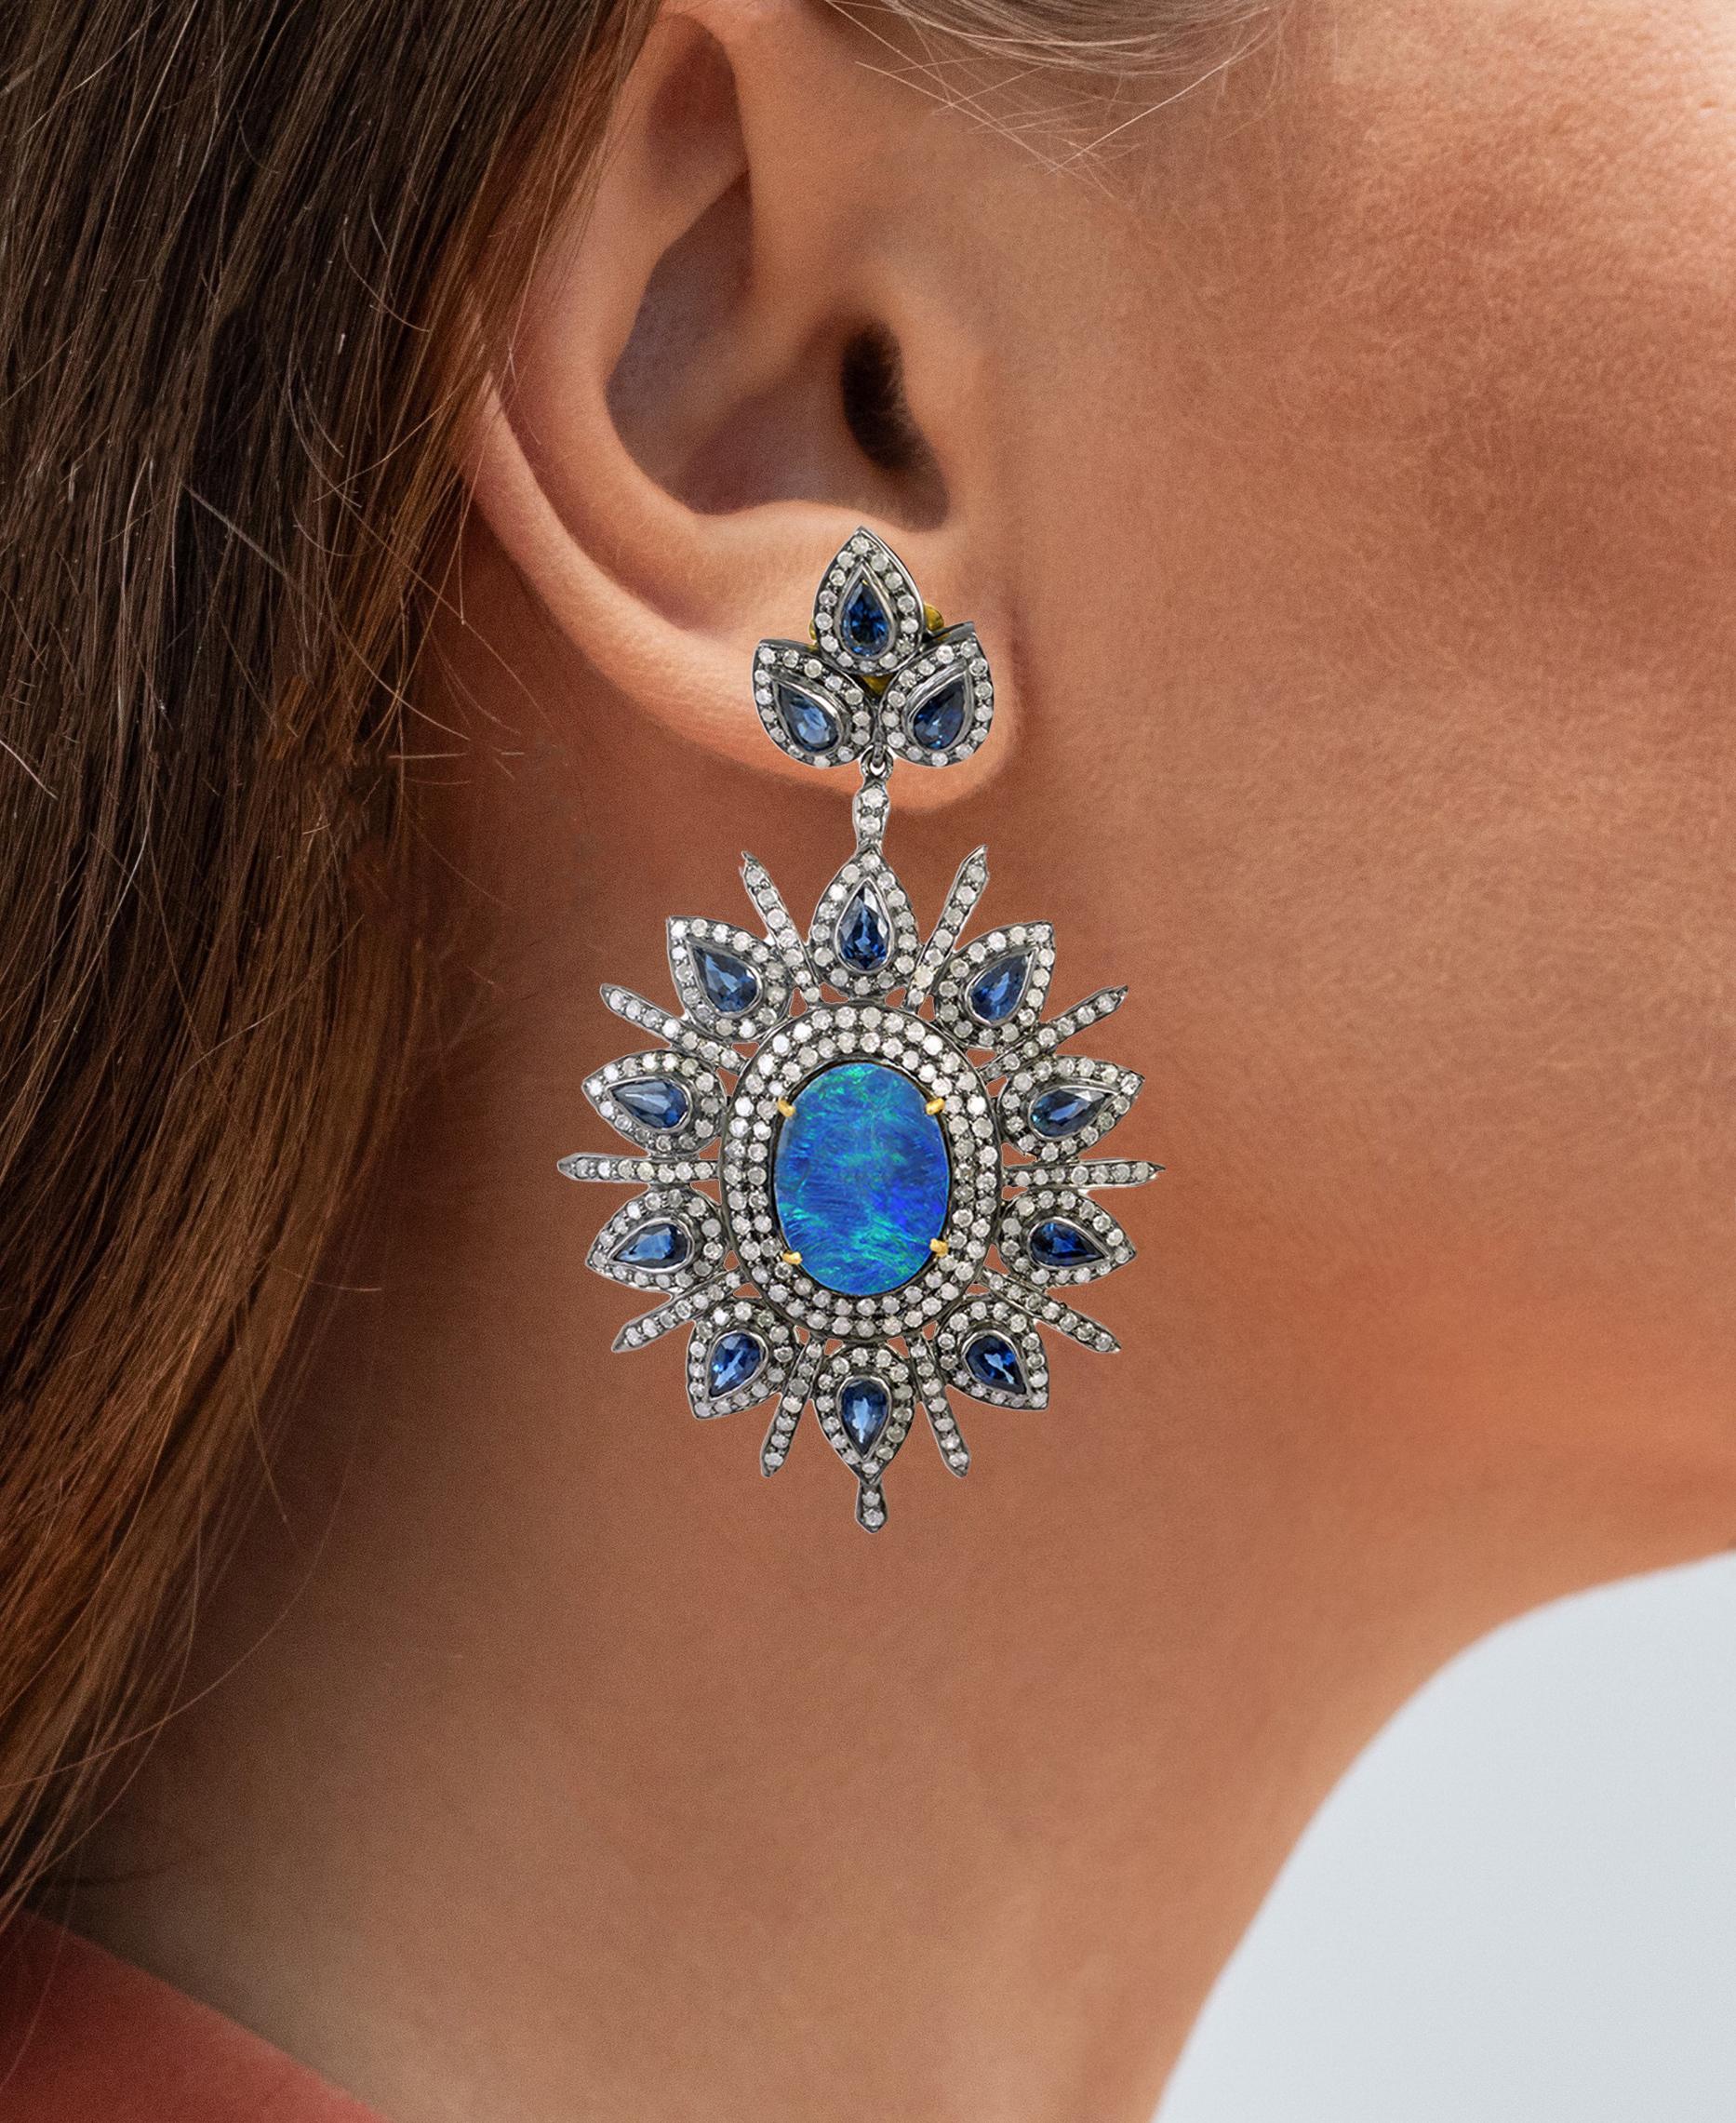 It comes with the appraisal by GIA GG/AJP
Black Opals = 6.70 Carats
Diamonds = 5.20 Carats
Blue Sapphires = 7 Carats
Dimensions: 65 x 39 mm
Metal: 18K Yellow Gold, Sterling Silver